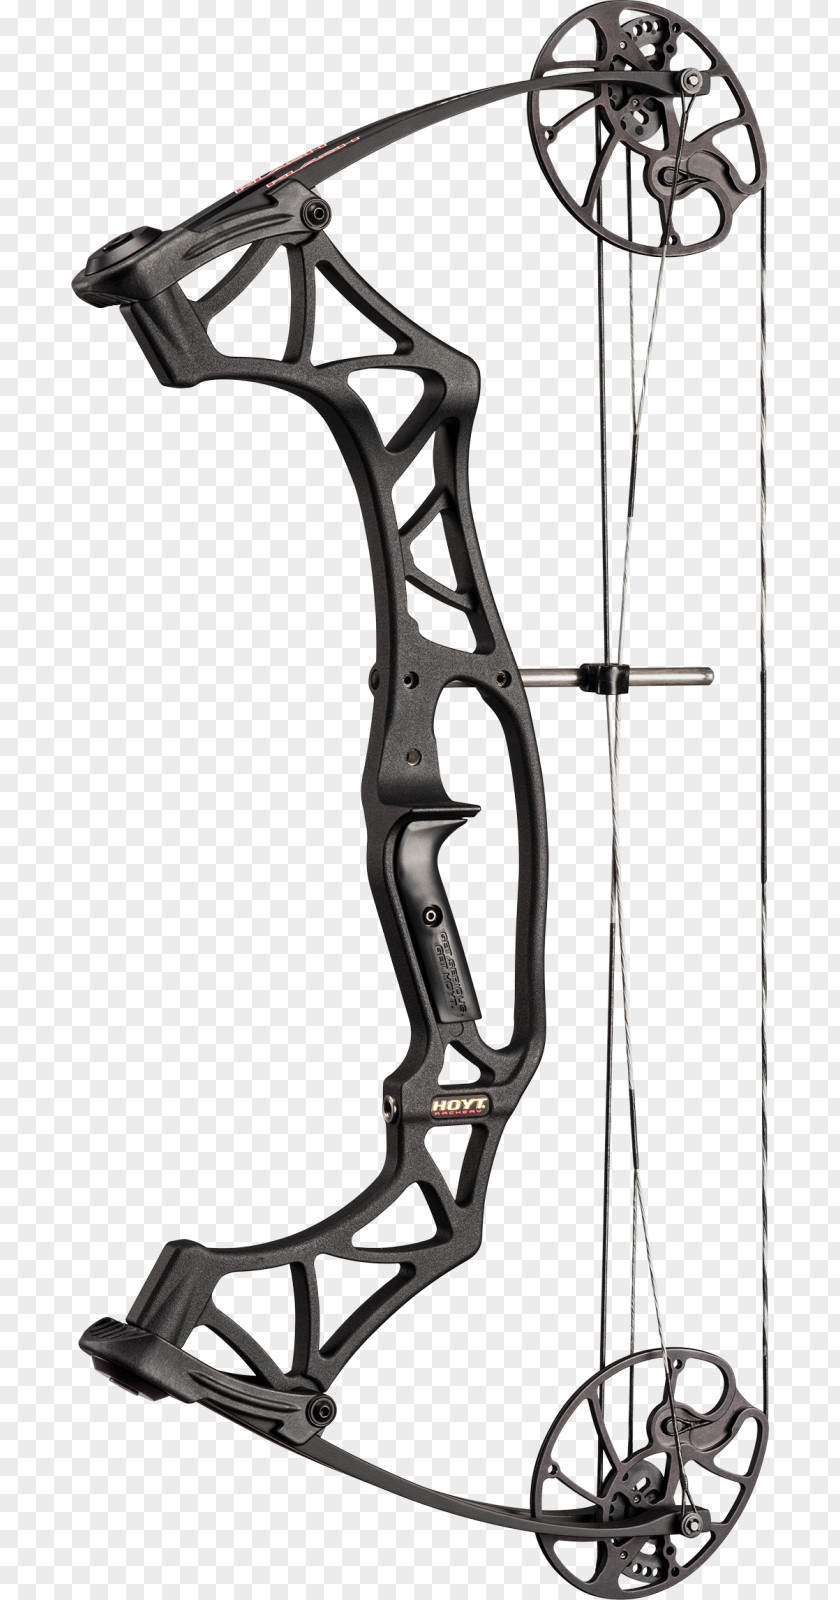 Bow And Arrow Compound Bows Hoyt Archery Bowhunting PNG